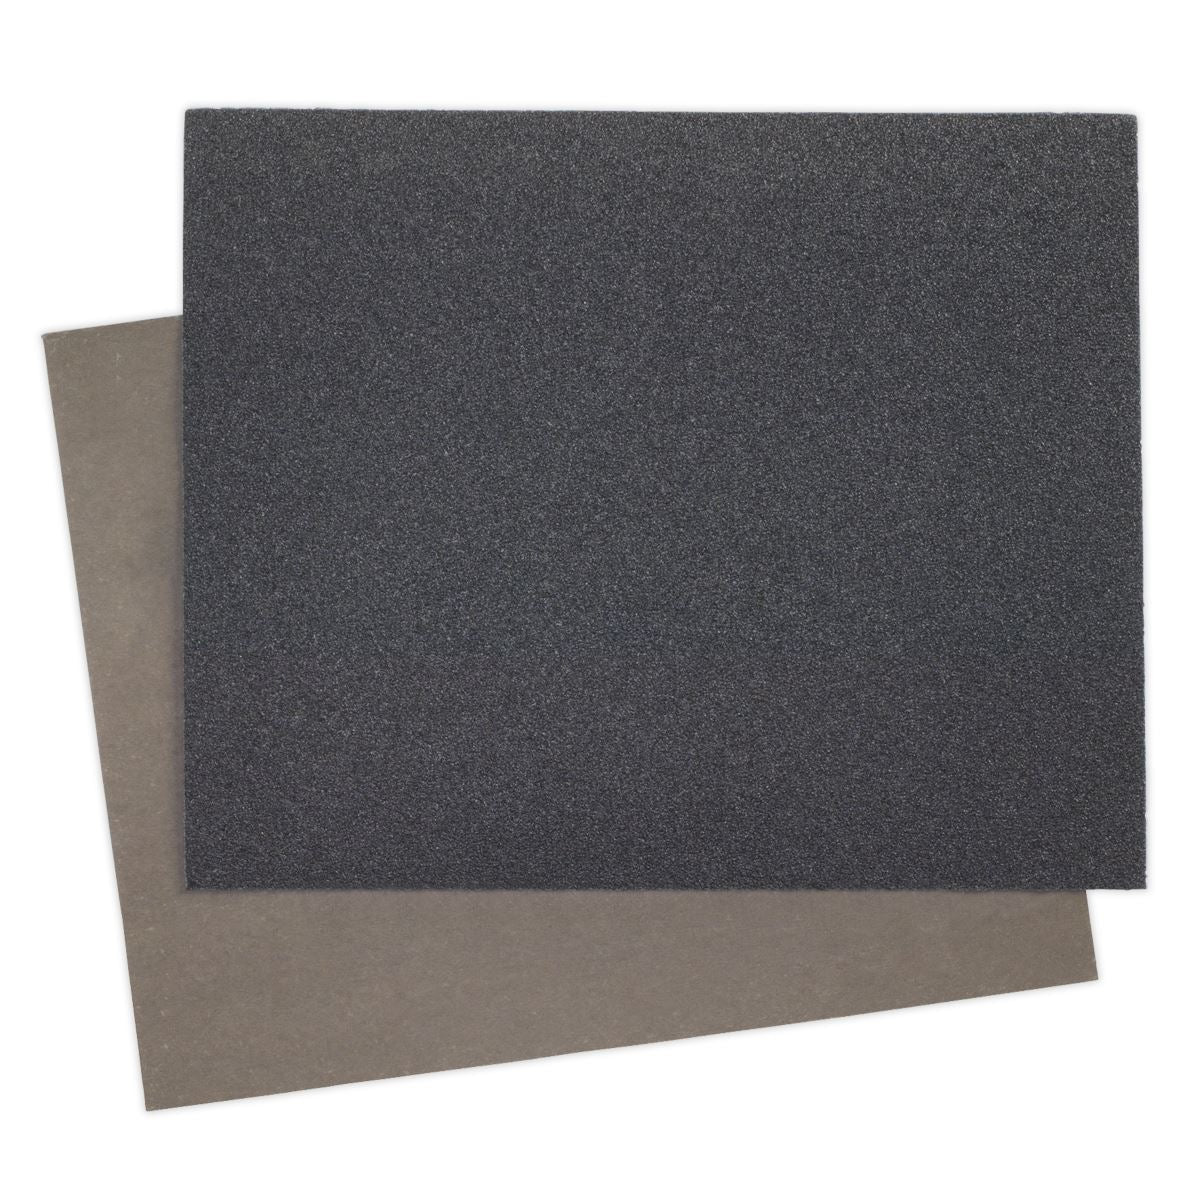 Sealey Wet & Dry Paper 230 x 280mm 600Grit Pack of 25